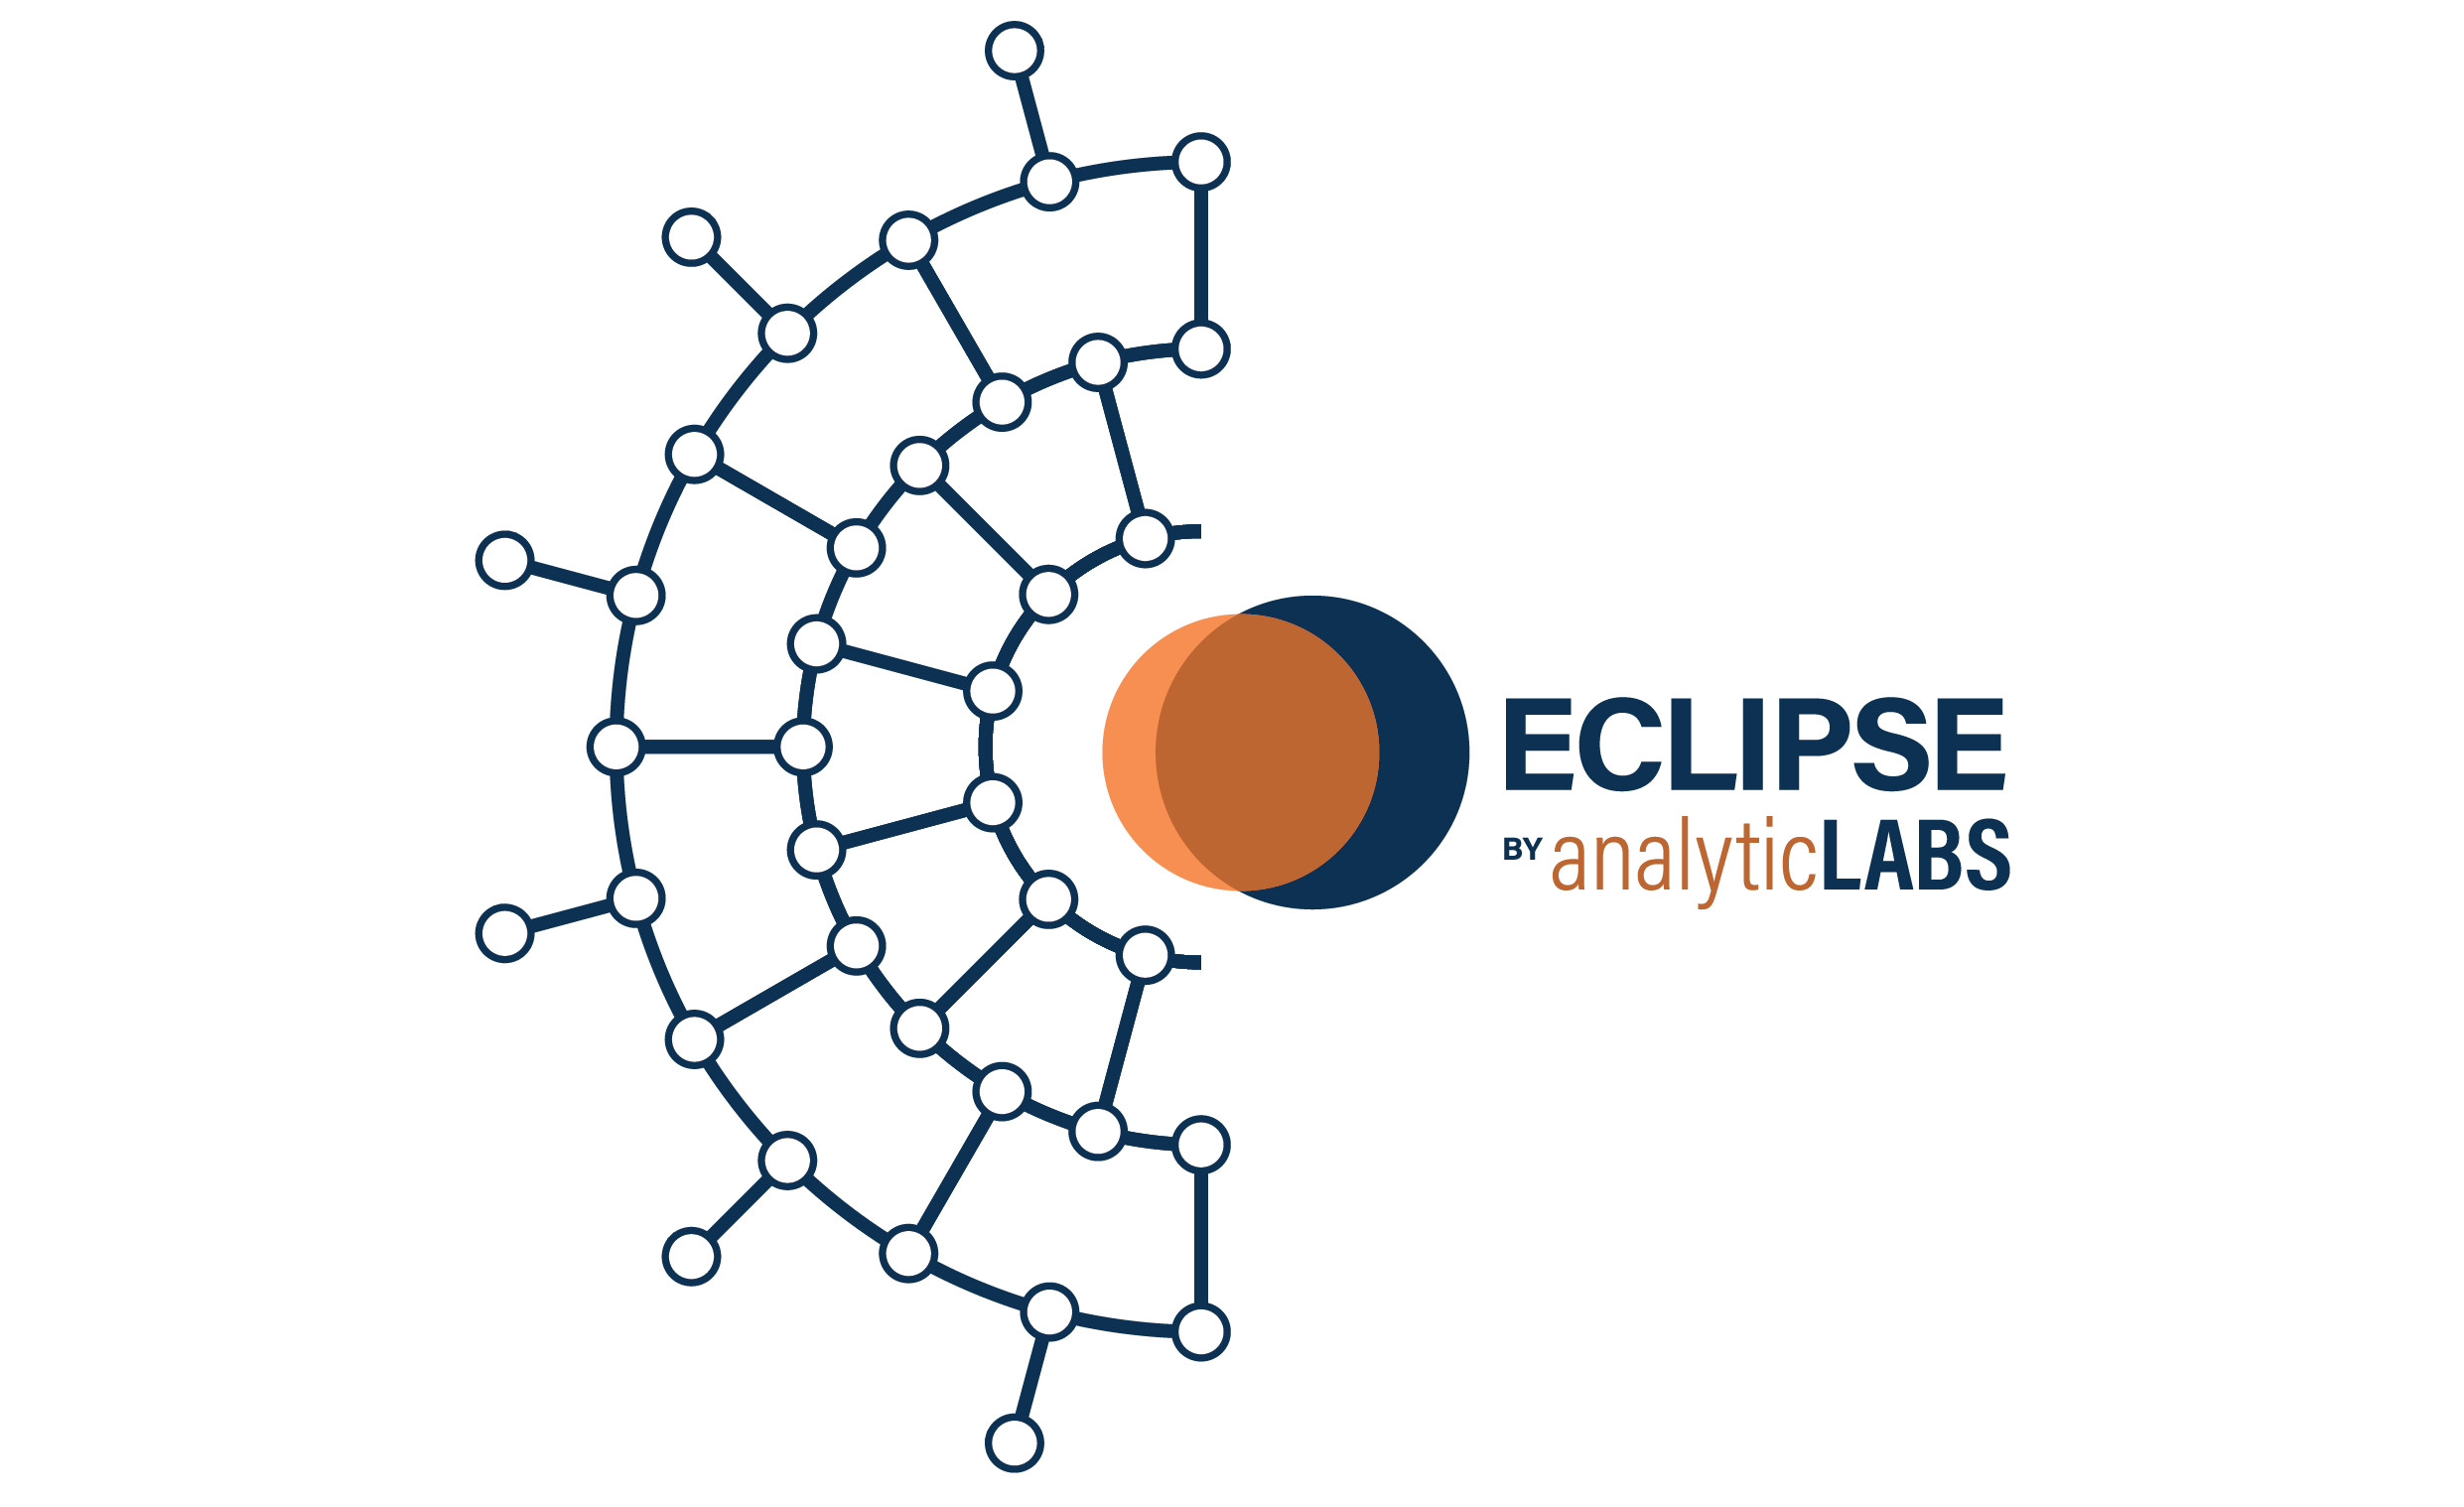 Eclipse makes connections between data points